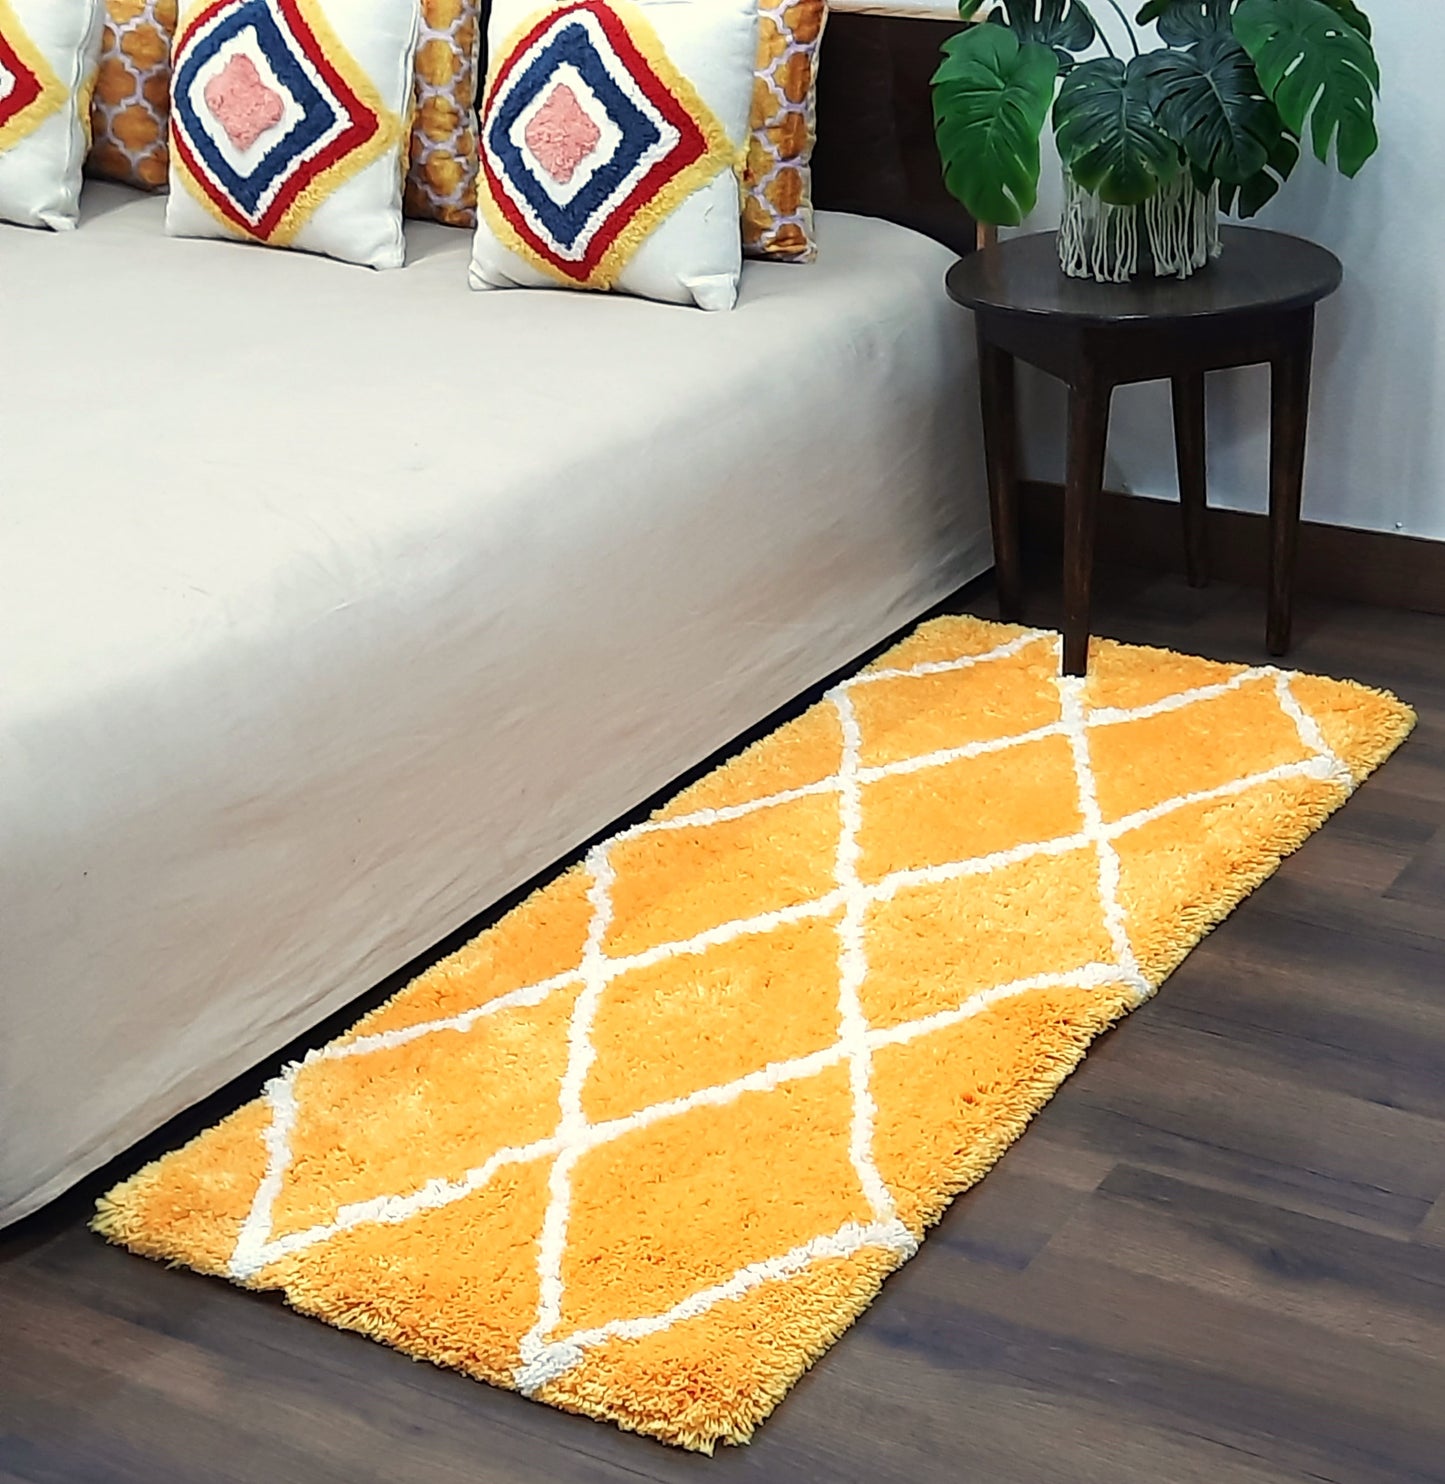 Plush Premium Shaggy Yellow Carpet With White Moroccan Design /Bedside Runners by Avioni Home